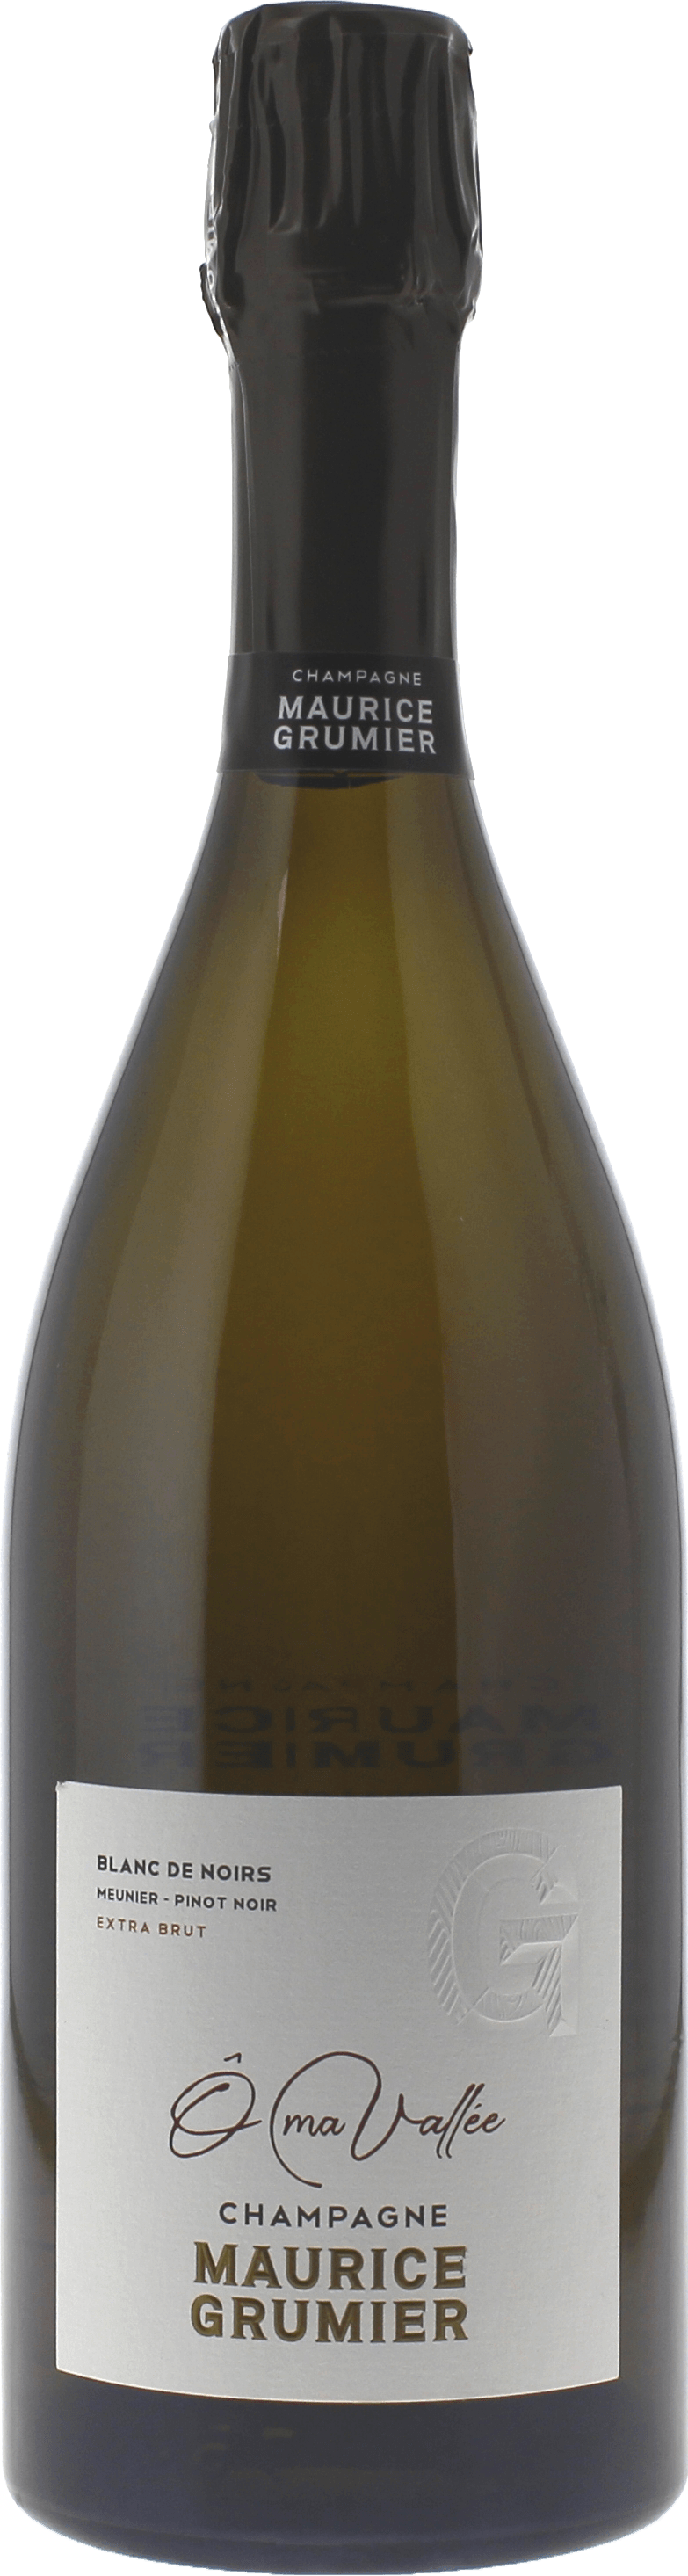  ma valle blanc de noirs extra brut  Maurice Grumier, Champagne